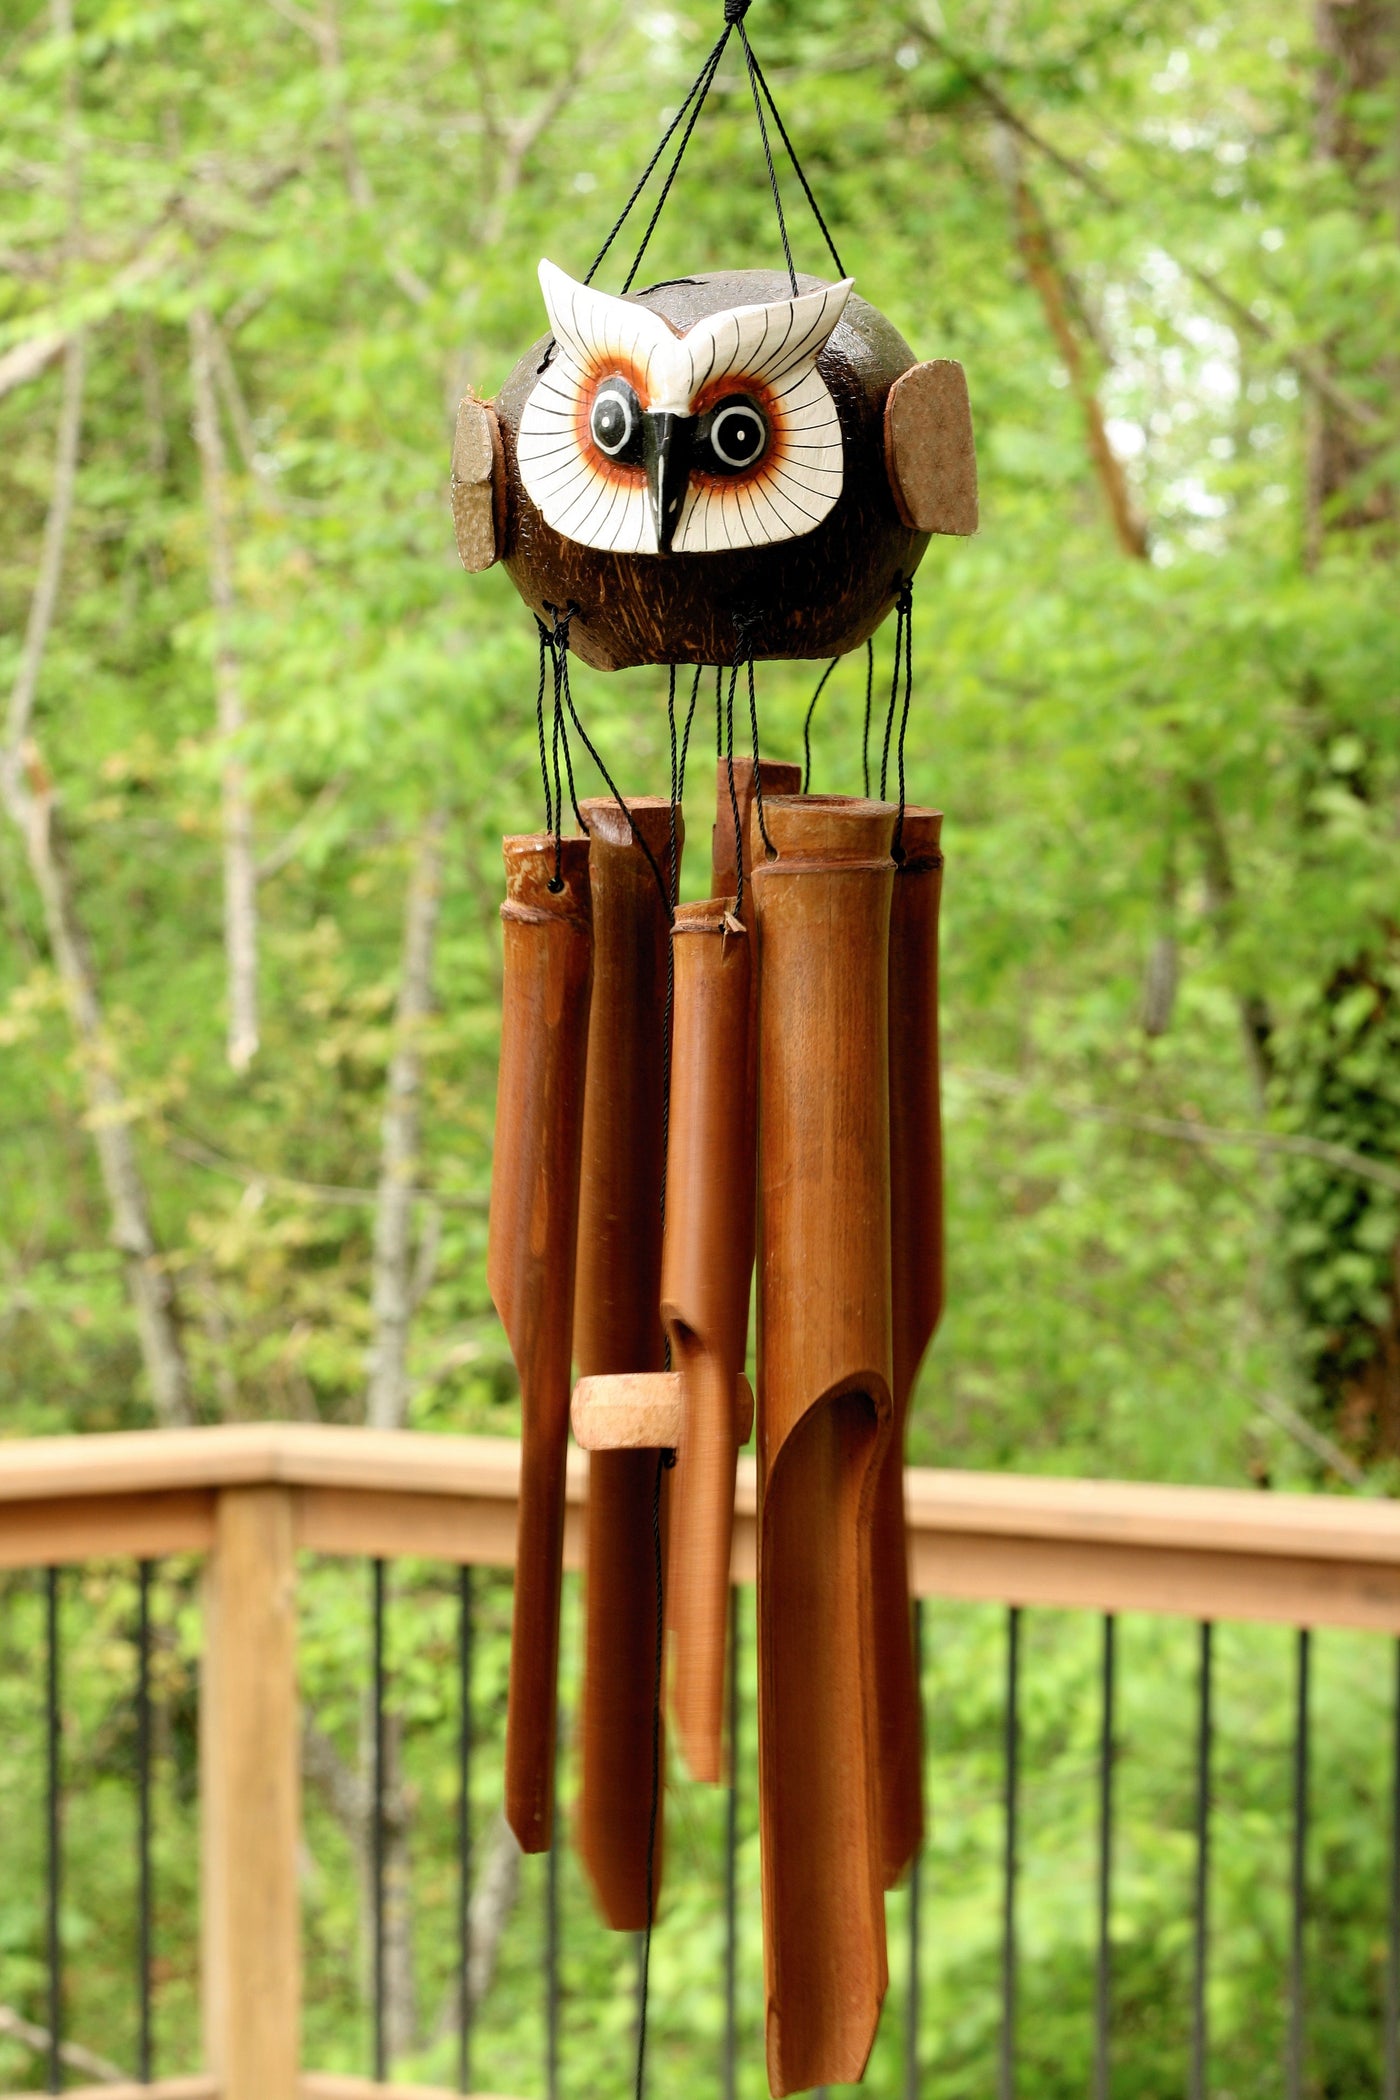 Handmade Wooden Flying Owl Bamboo Wind Chime Wood Statue Figurine Hoot Sculpture Art Decorative Rustic Patio Garden Outdoor Decor Handcrafted Decoration